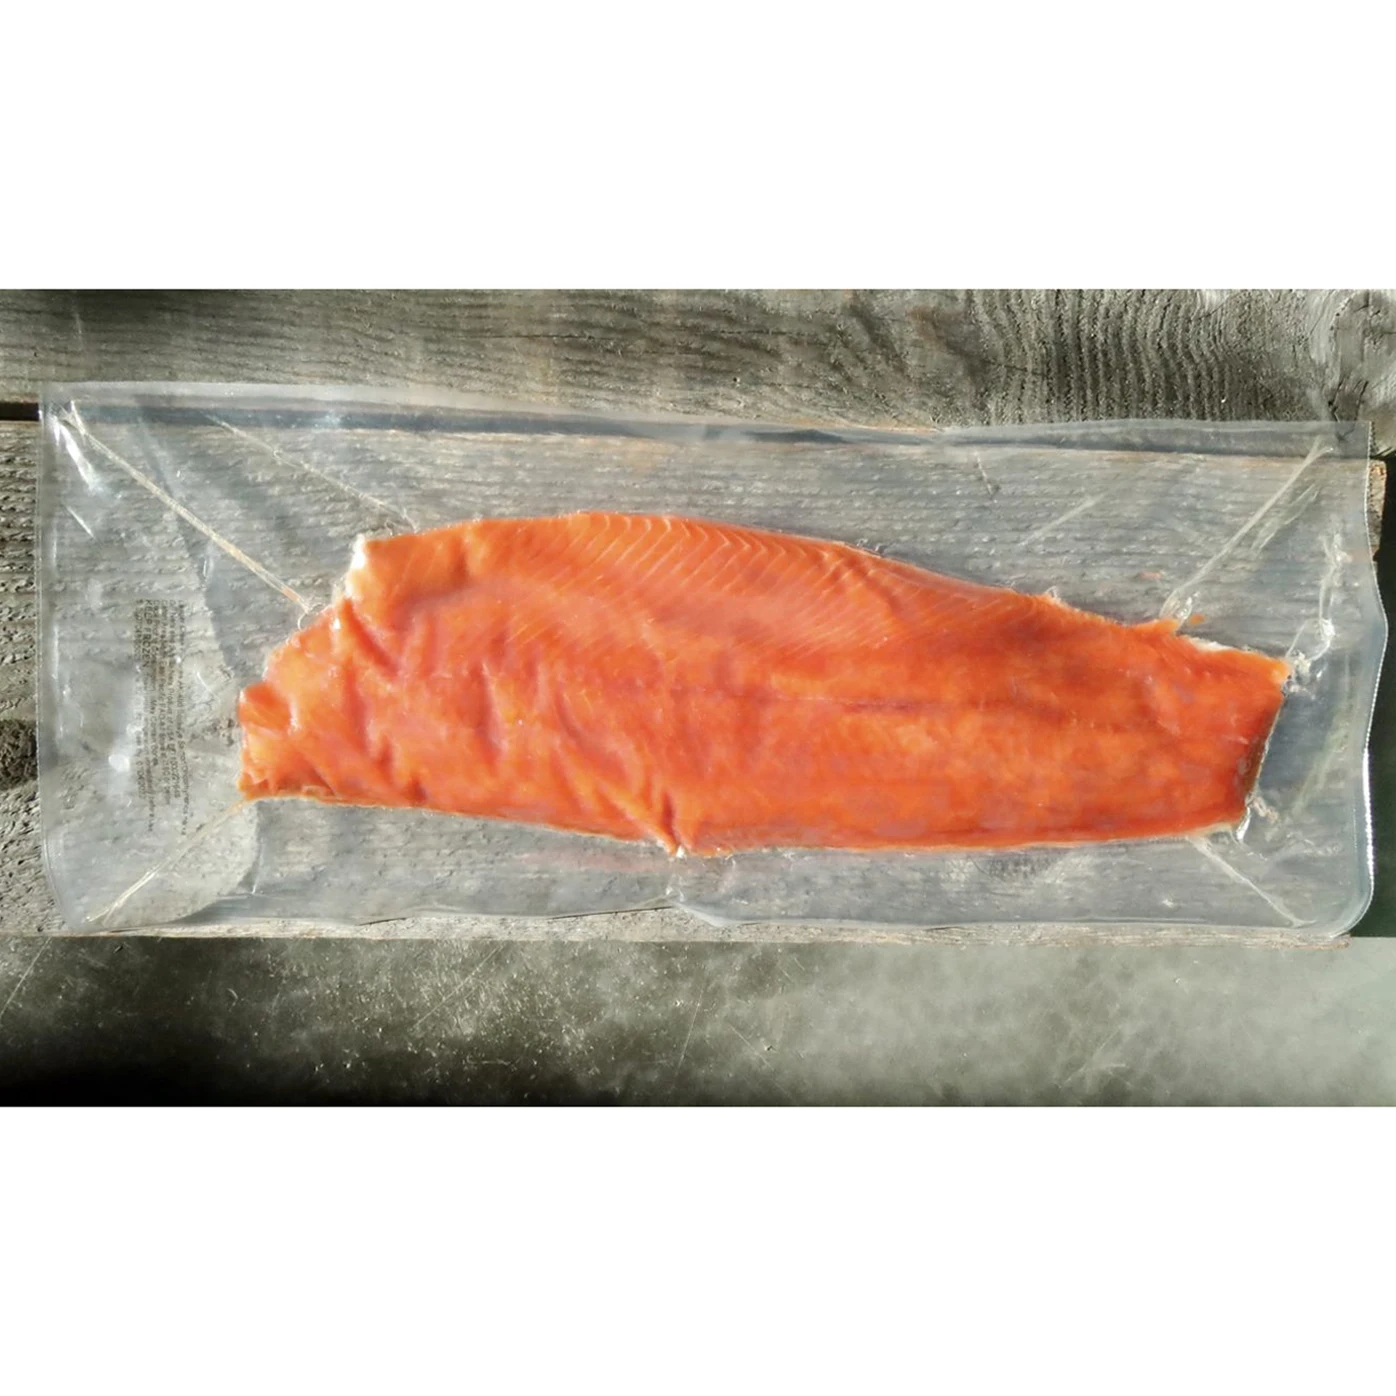 Bristol Bay Sockeye Salmon, 25 lb case IVP Fillets, Legit Fish seafood traceability platform and labeling available upon request